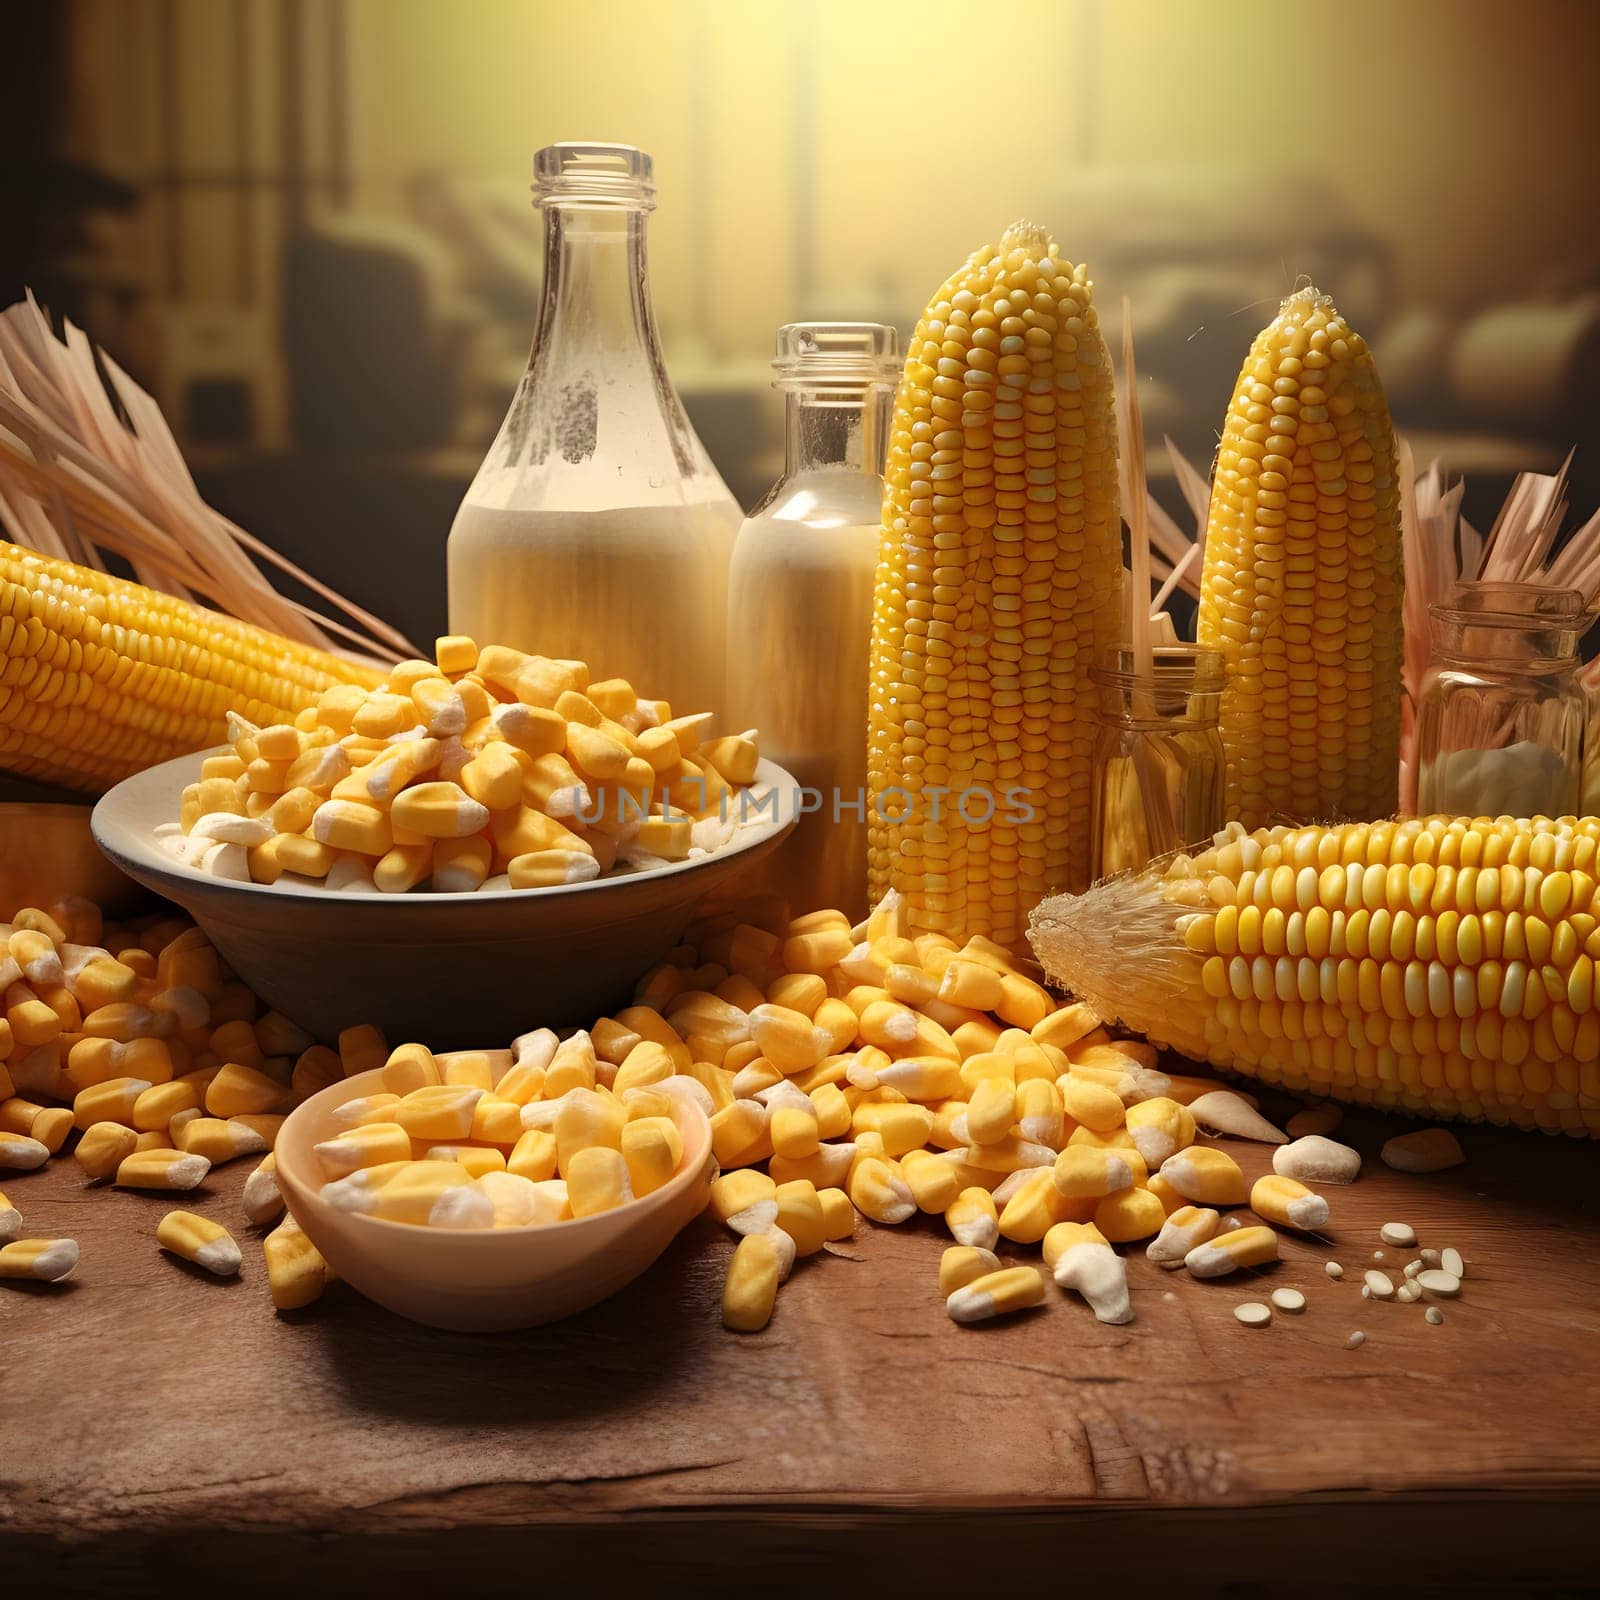 Yellow corn cobs on a wooden table two bottles of milk, corn kernels. Corn as a dish of thanksgiving for the harvest. An atmosphere of joy and celebration.